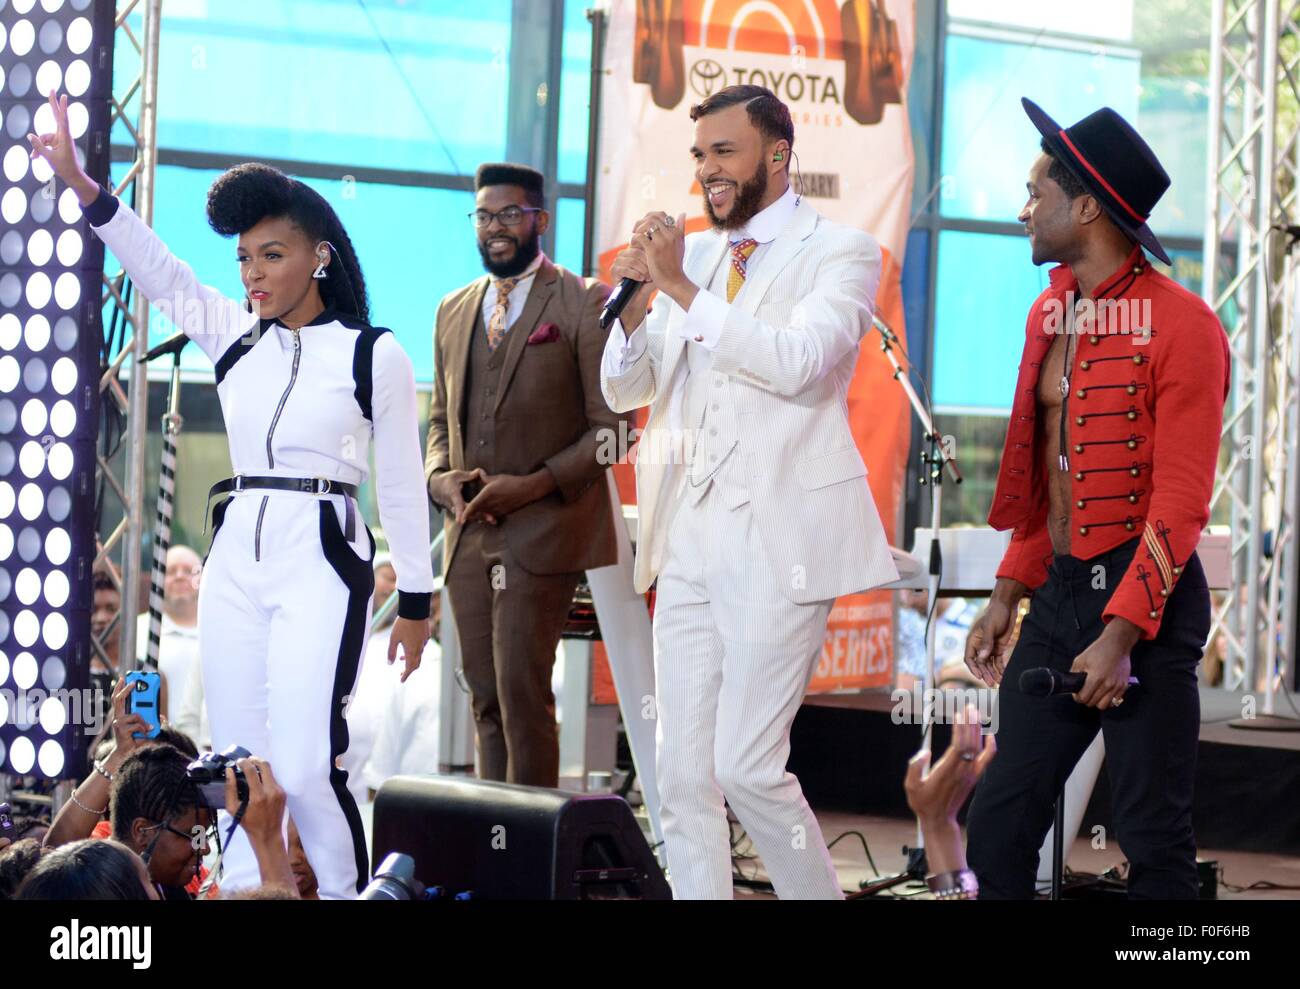 New York, NY, USA. 14th Aug, 2015. Janelle Monae, Wondaland's Jidenna, Roman Gianarthur on stage for NBC Today Show Concert with JANELLE MONAE, Rockefeller Plaza, New York, NY August 14, 2015. Credit:  Derek Storm/Everett Collection/Alamy Live News Stock Photo